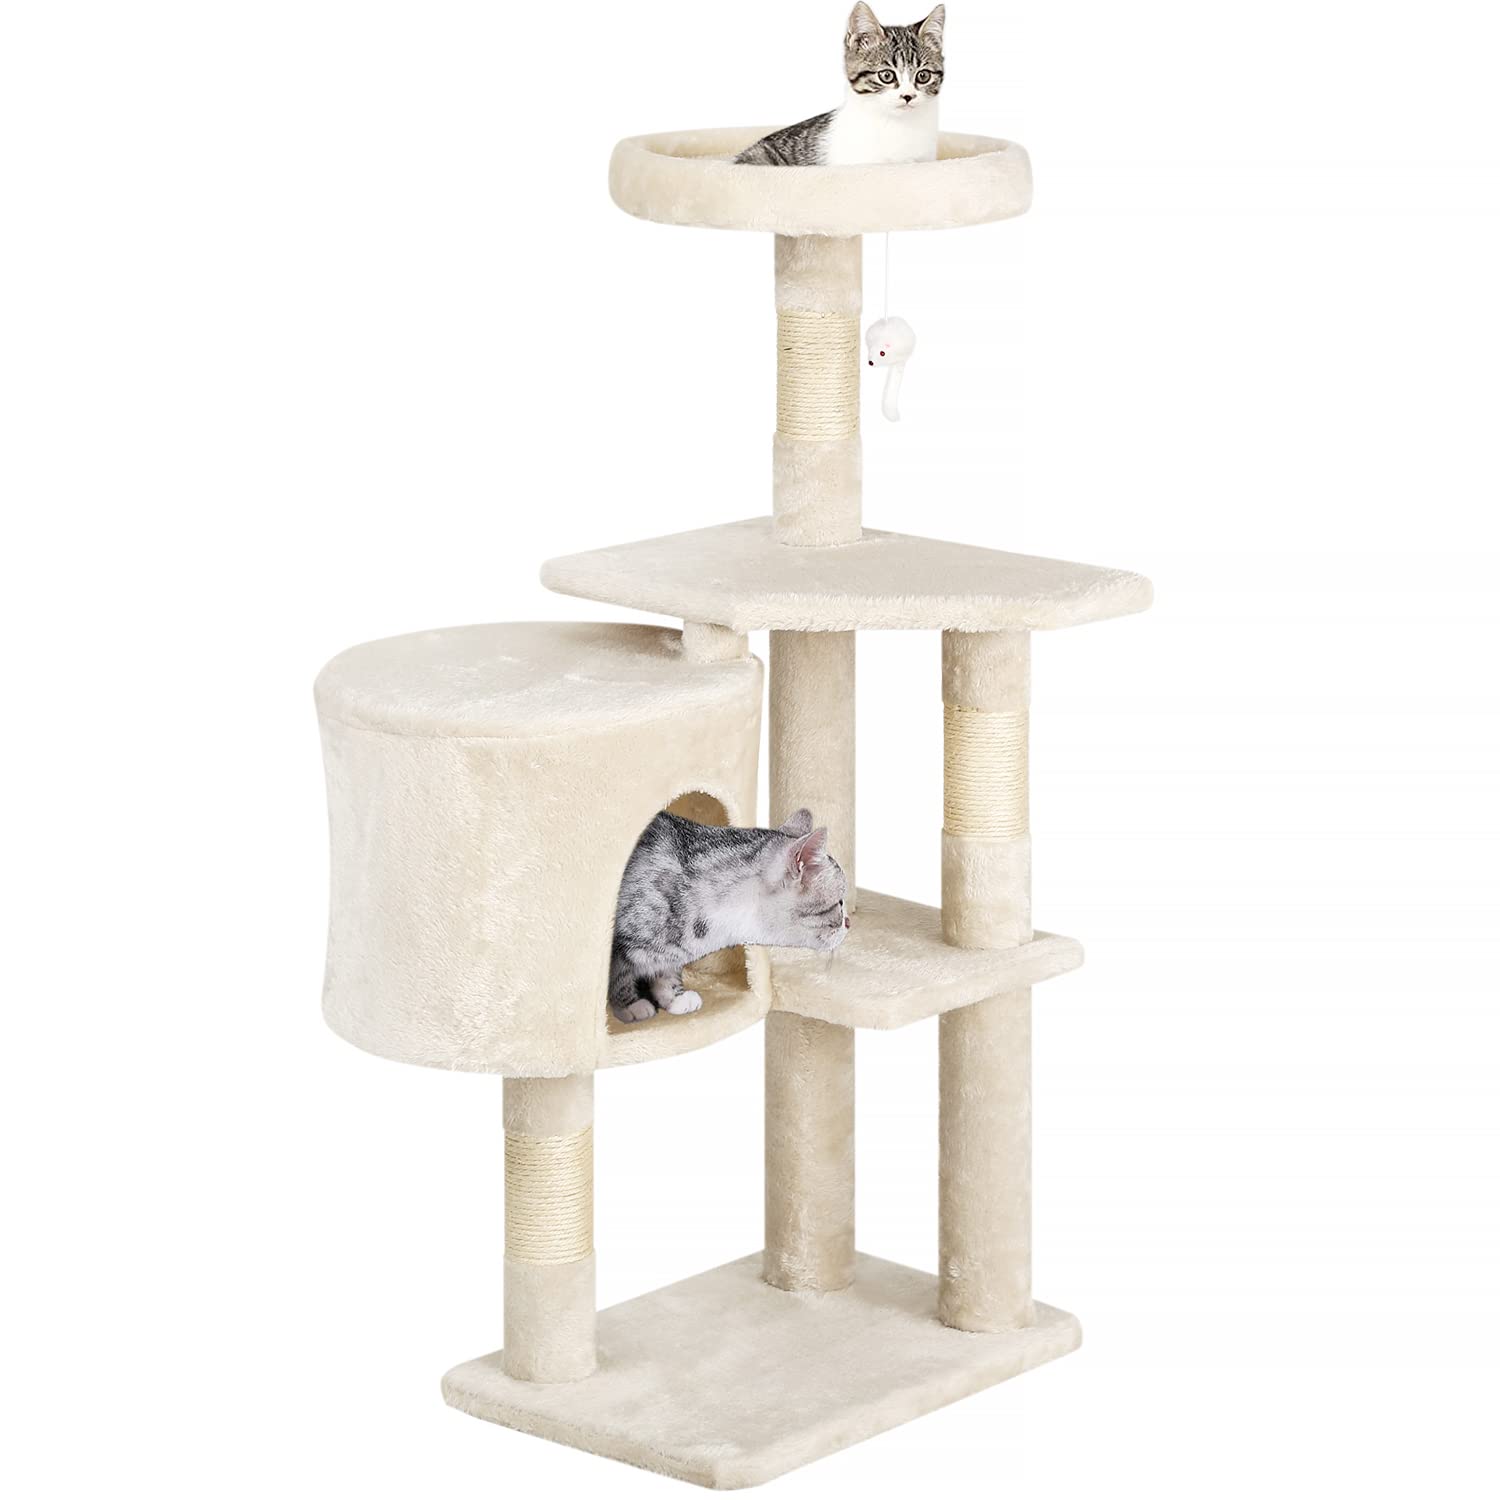 BestPet cat Tree 36 inch Tall Scratching Toy Activity centre cat Tower cat condo Multi-Level Furniture Scratching Posts for Indo